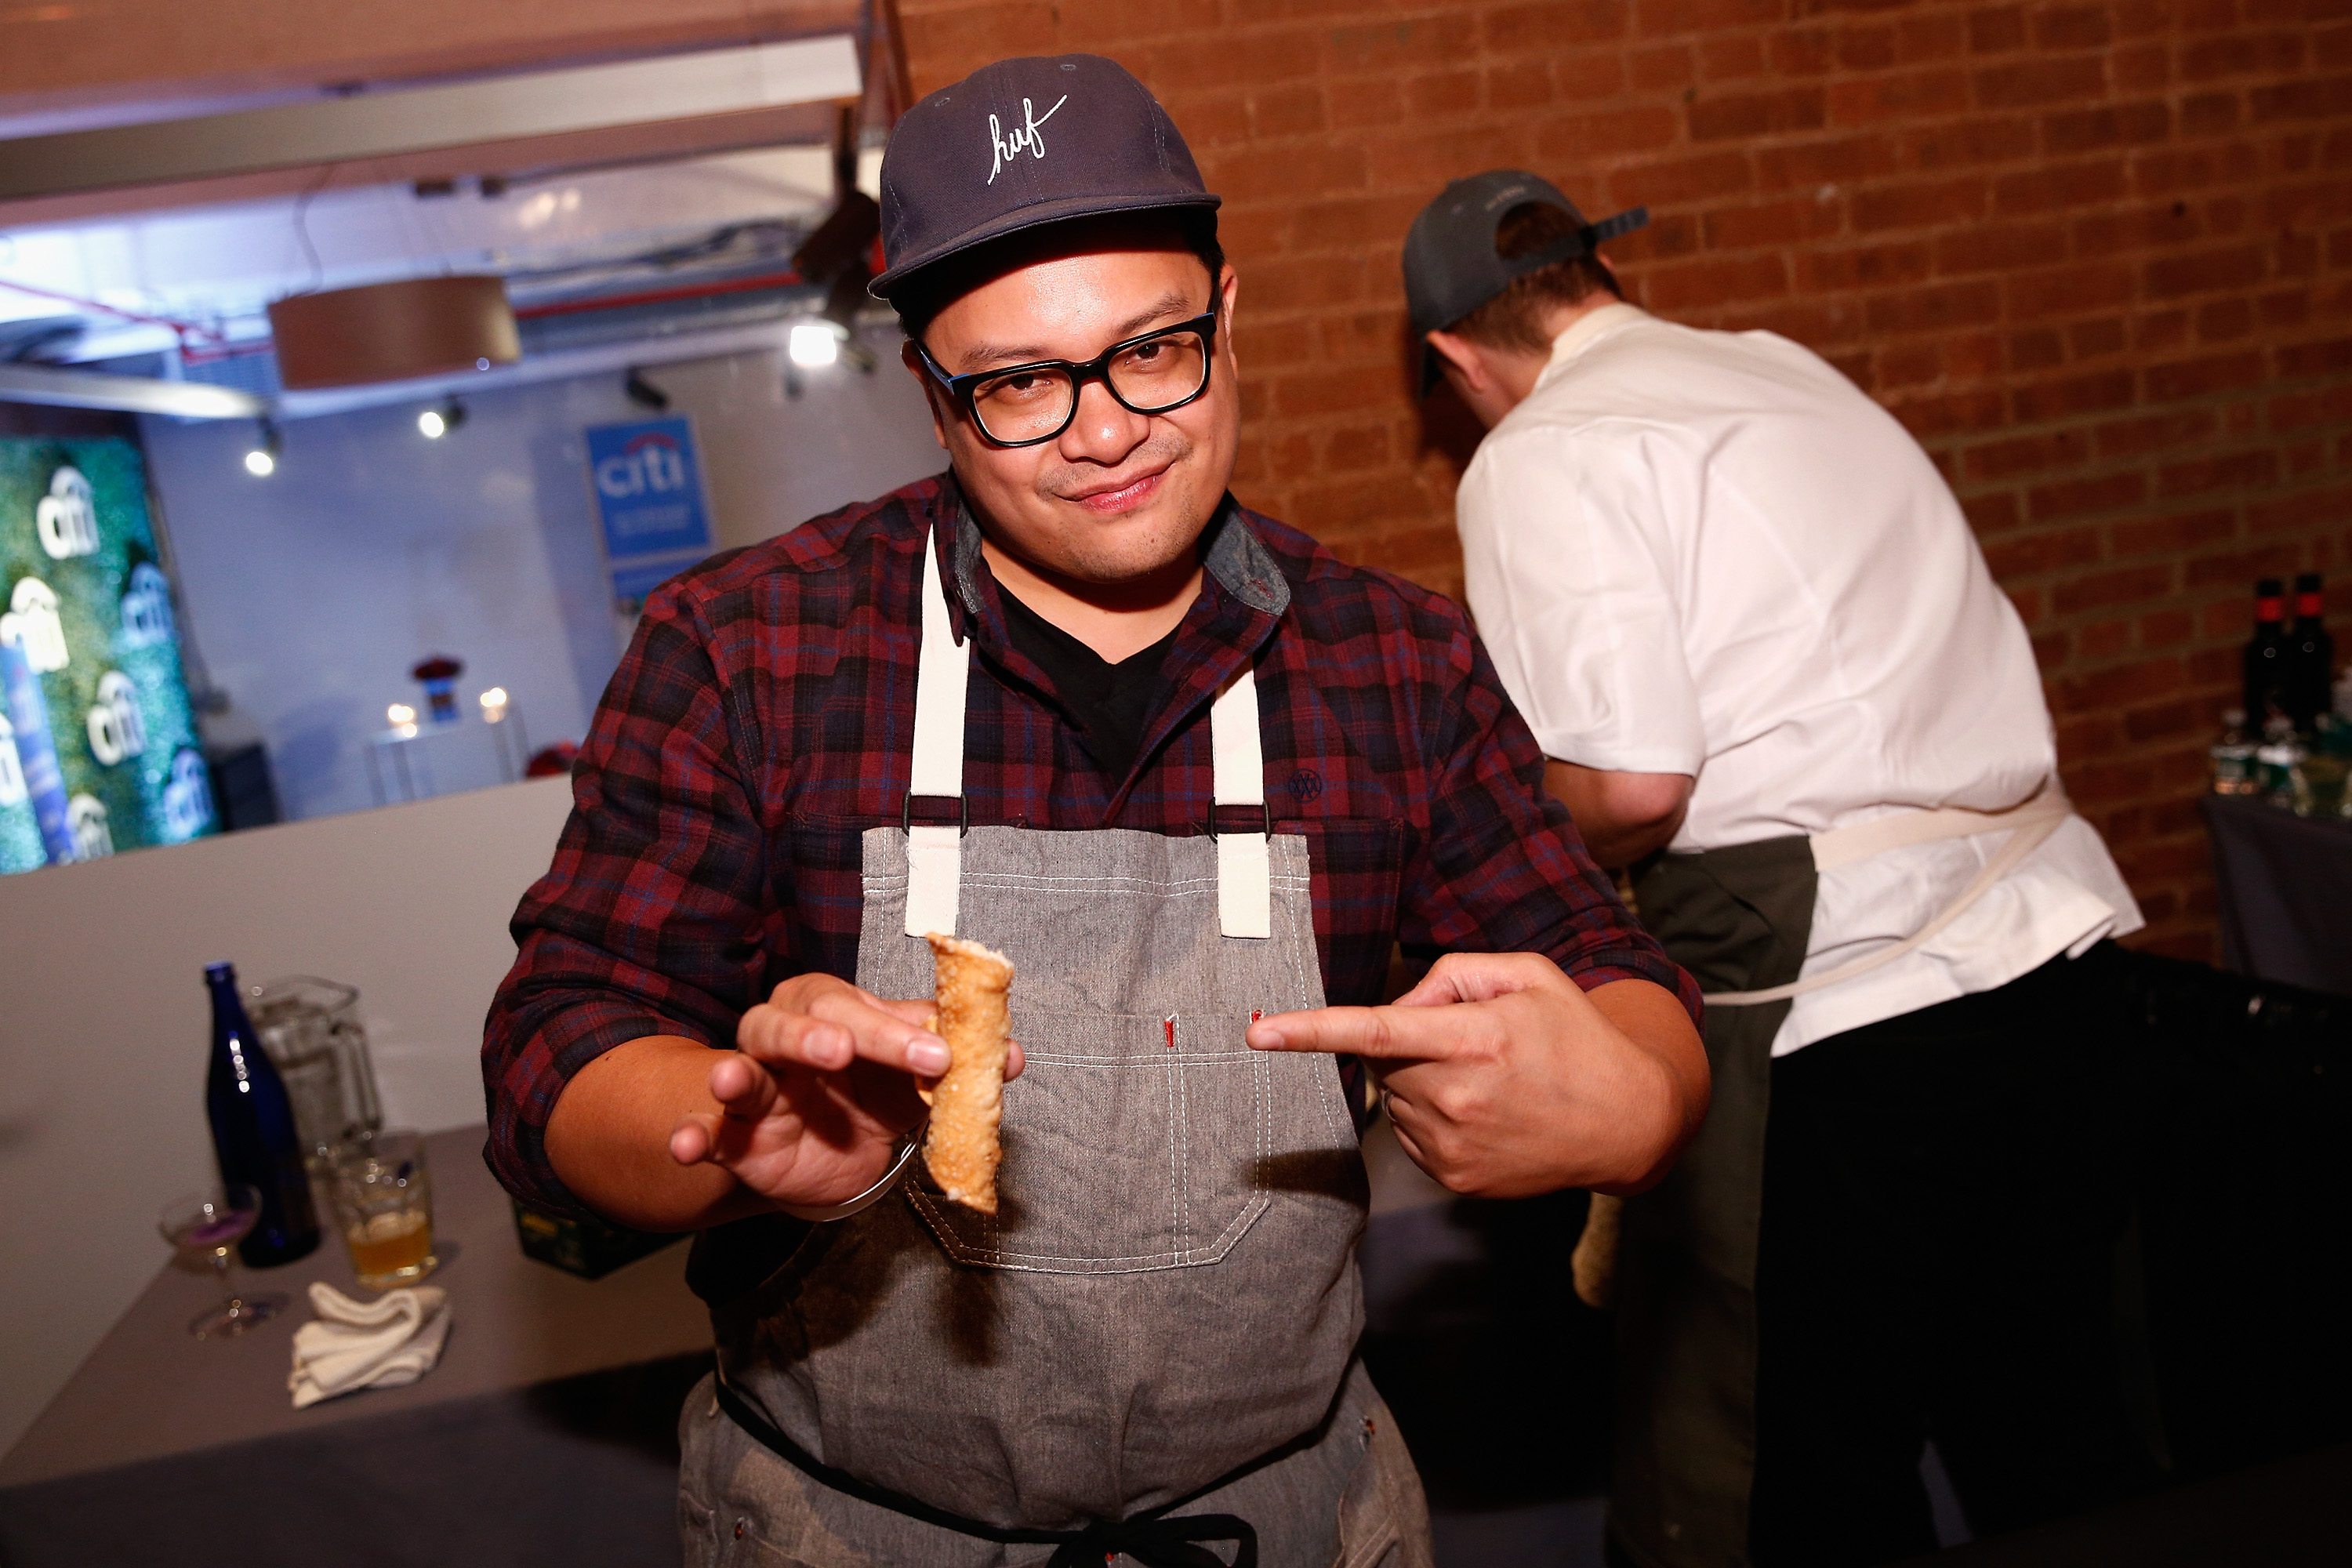 A man, chef Dale Talde, poses with an egg roll for a photograph.